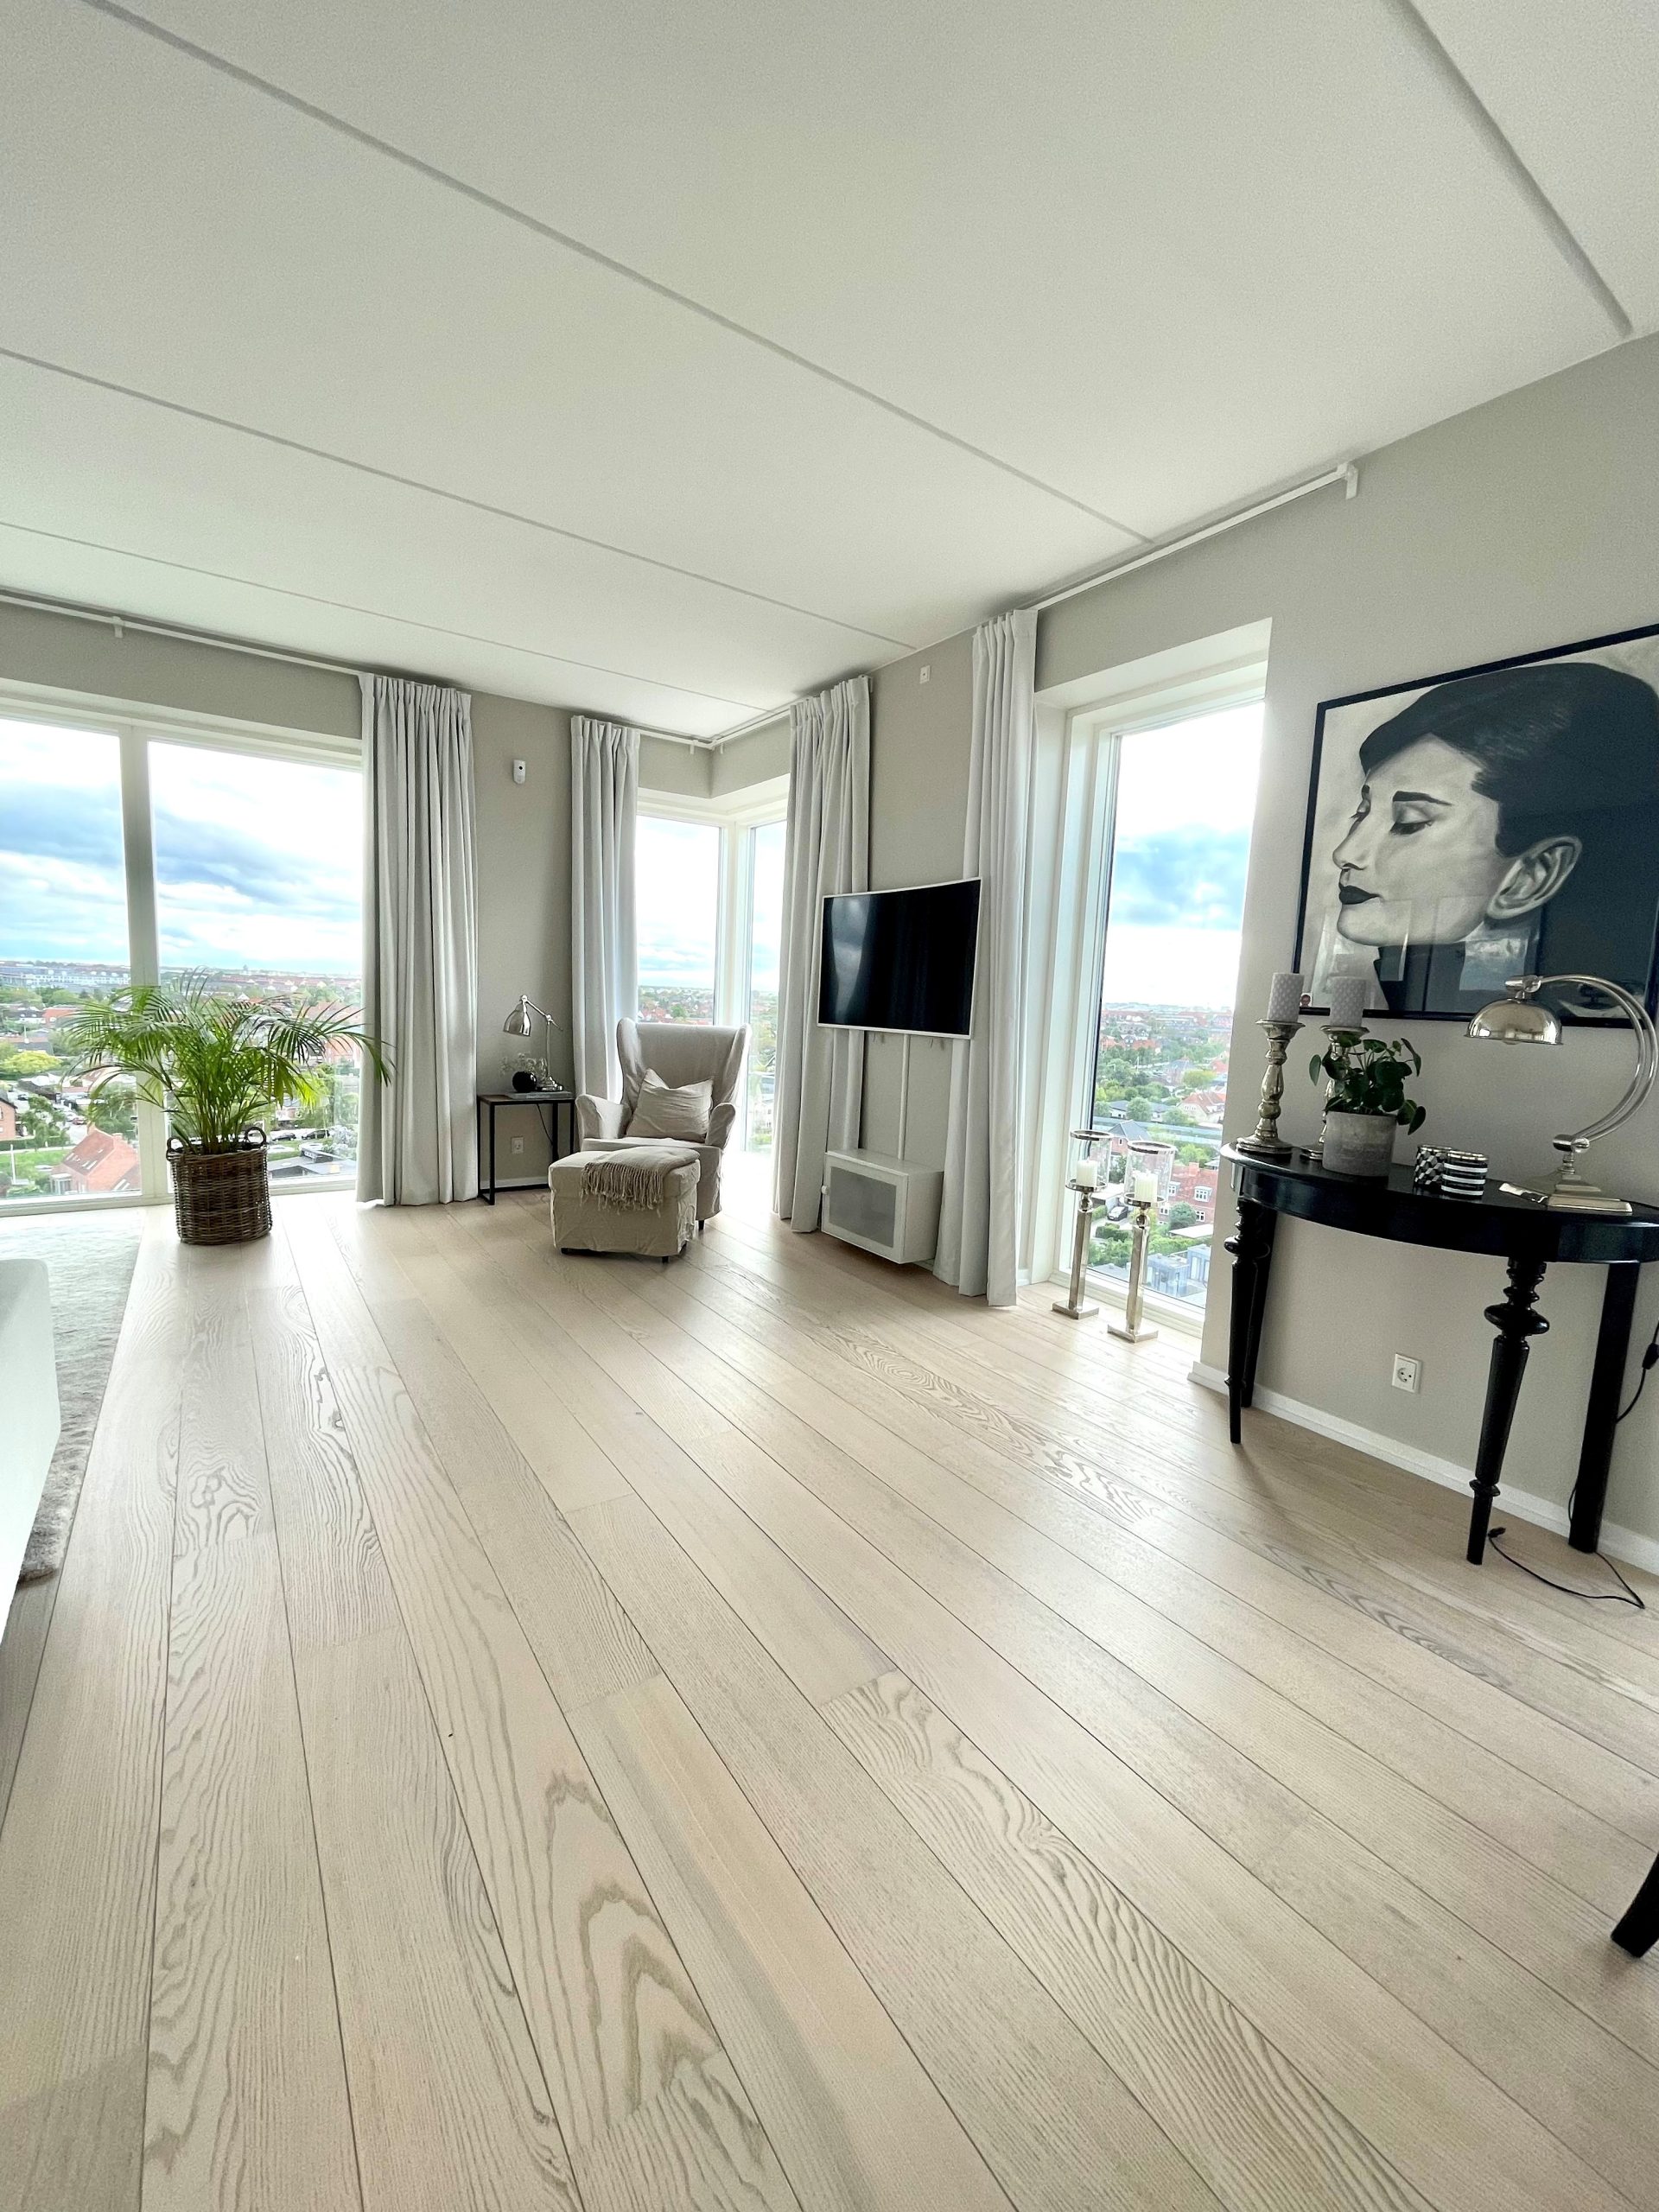 1660 – Beautiful apartment with a view and west-facing balcony